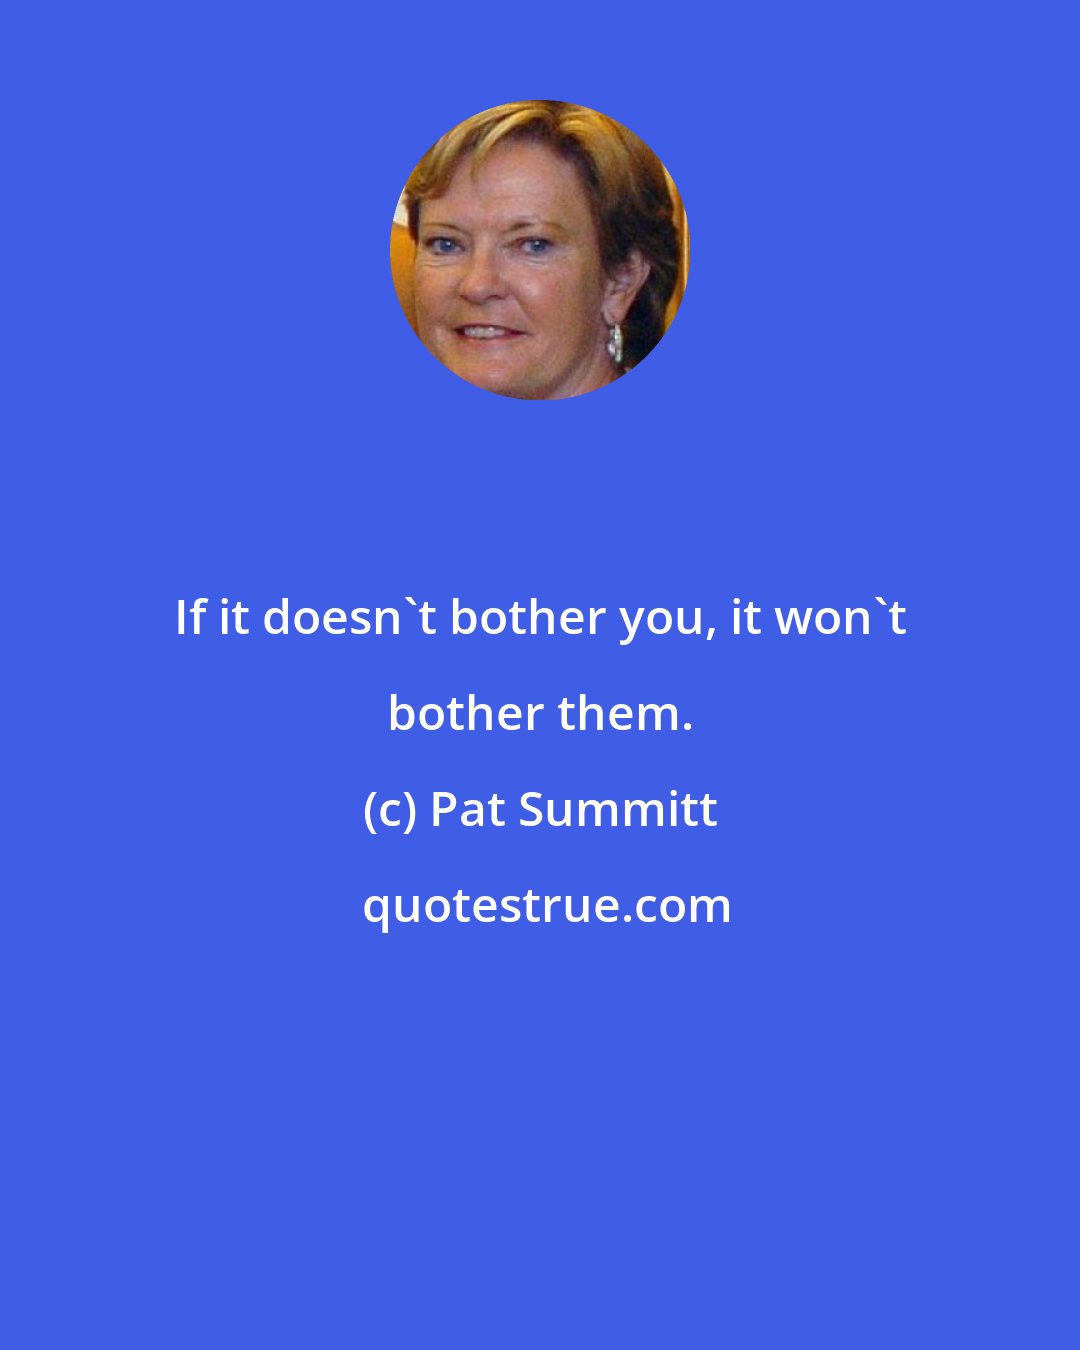 Pat Summitt: If it doesn't bother you, it won't bother them.